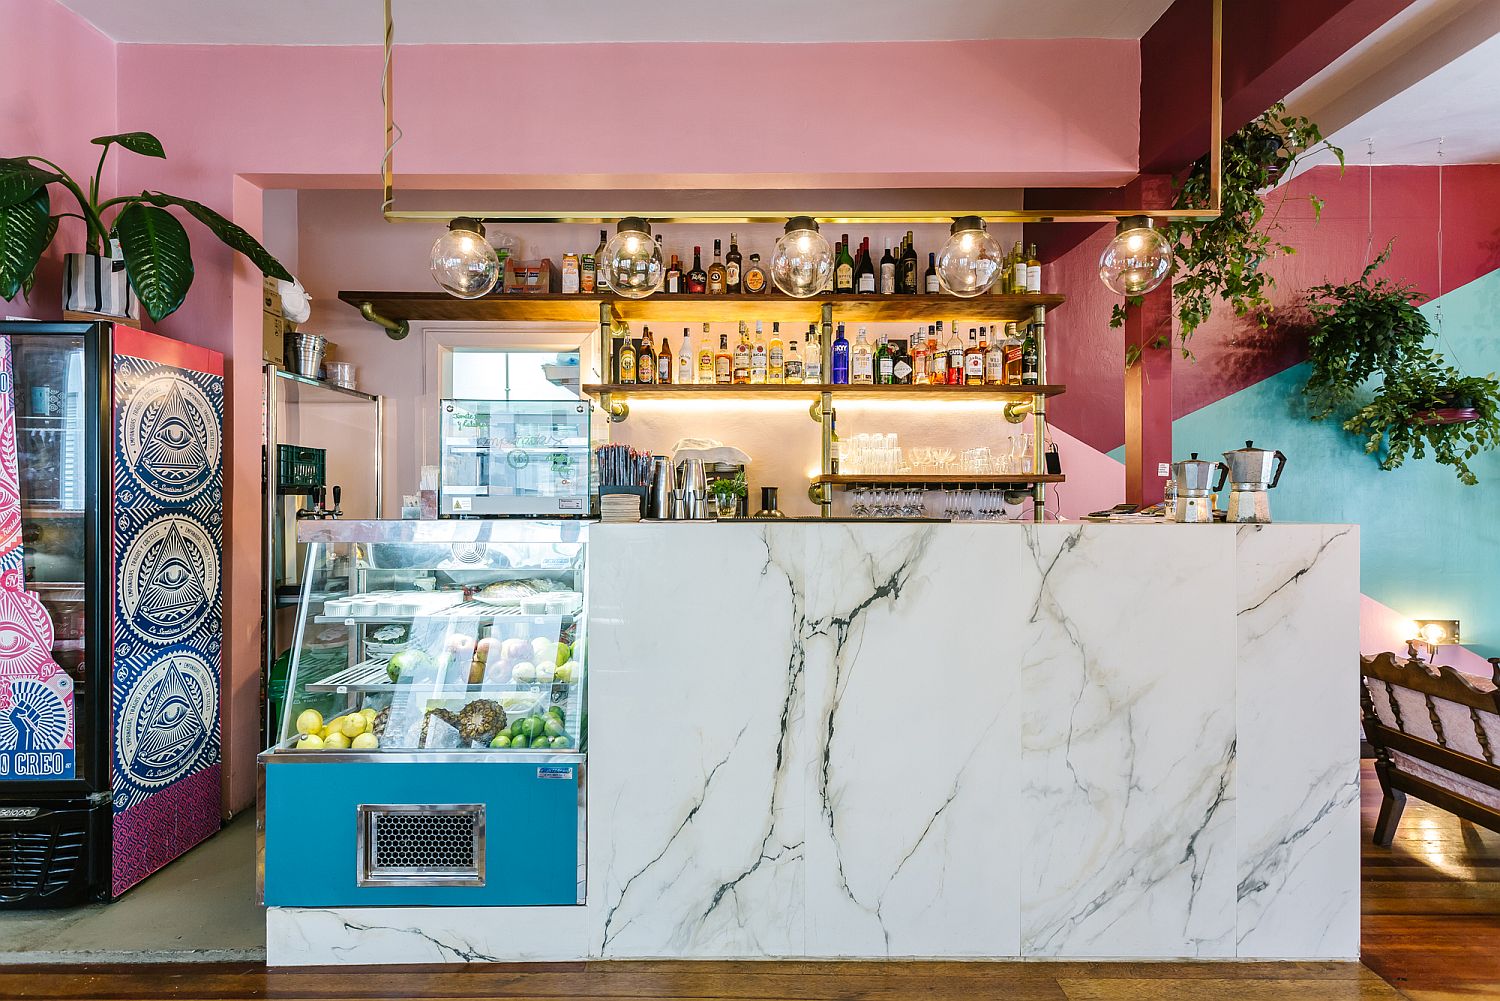 Marble-and-pink-create-a-lovely-and-vivacious-cafe-interior